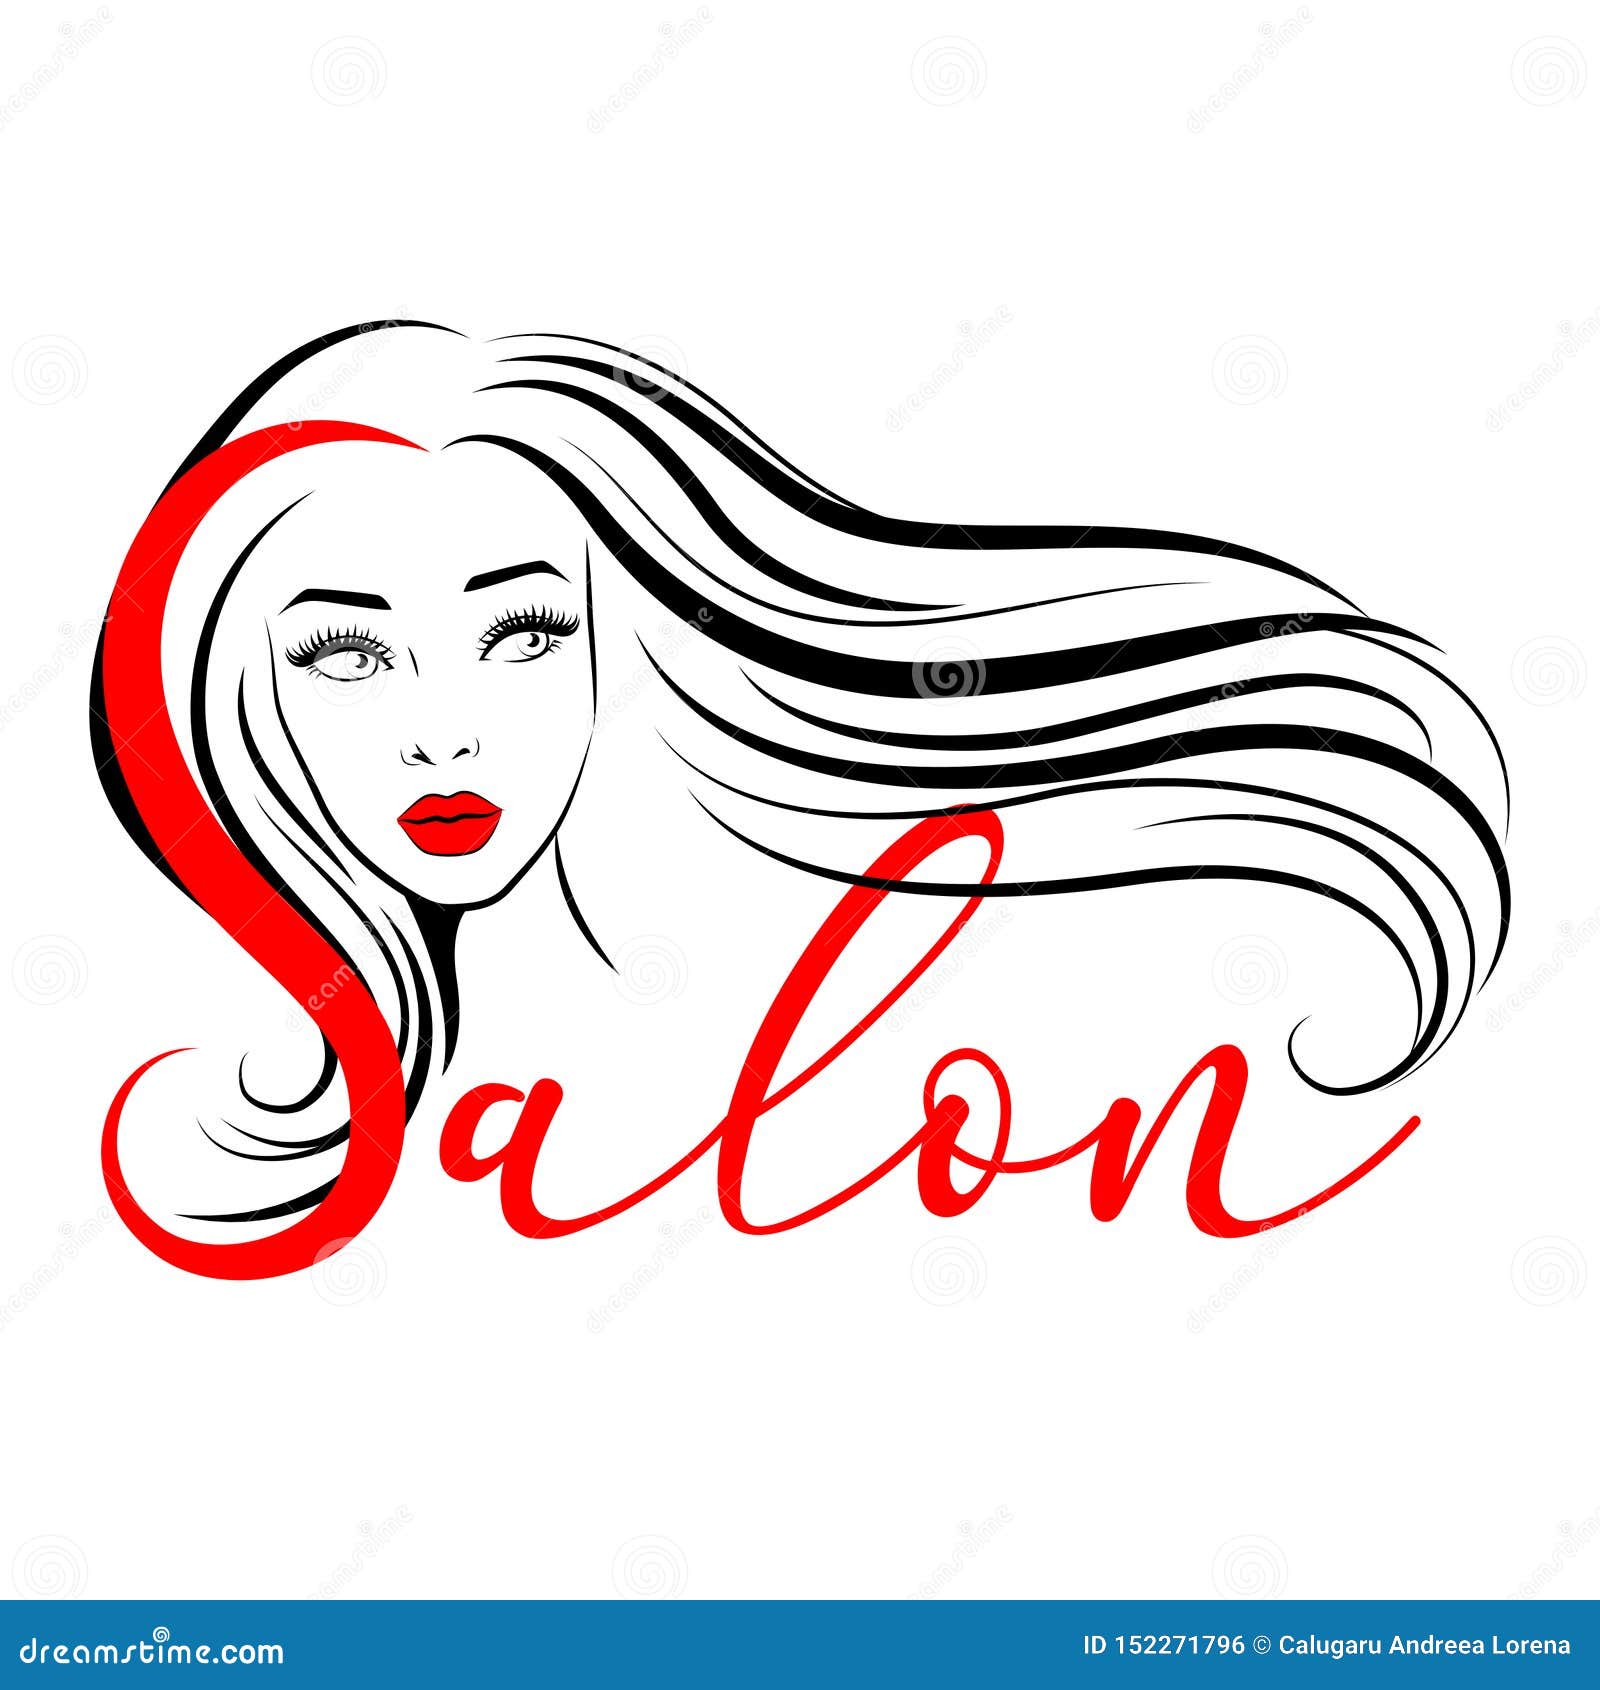 Girl with long hair stock vector. Illustration of color - 152271796